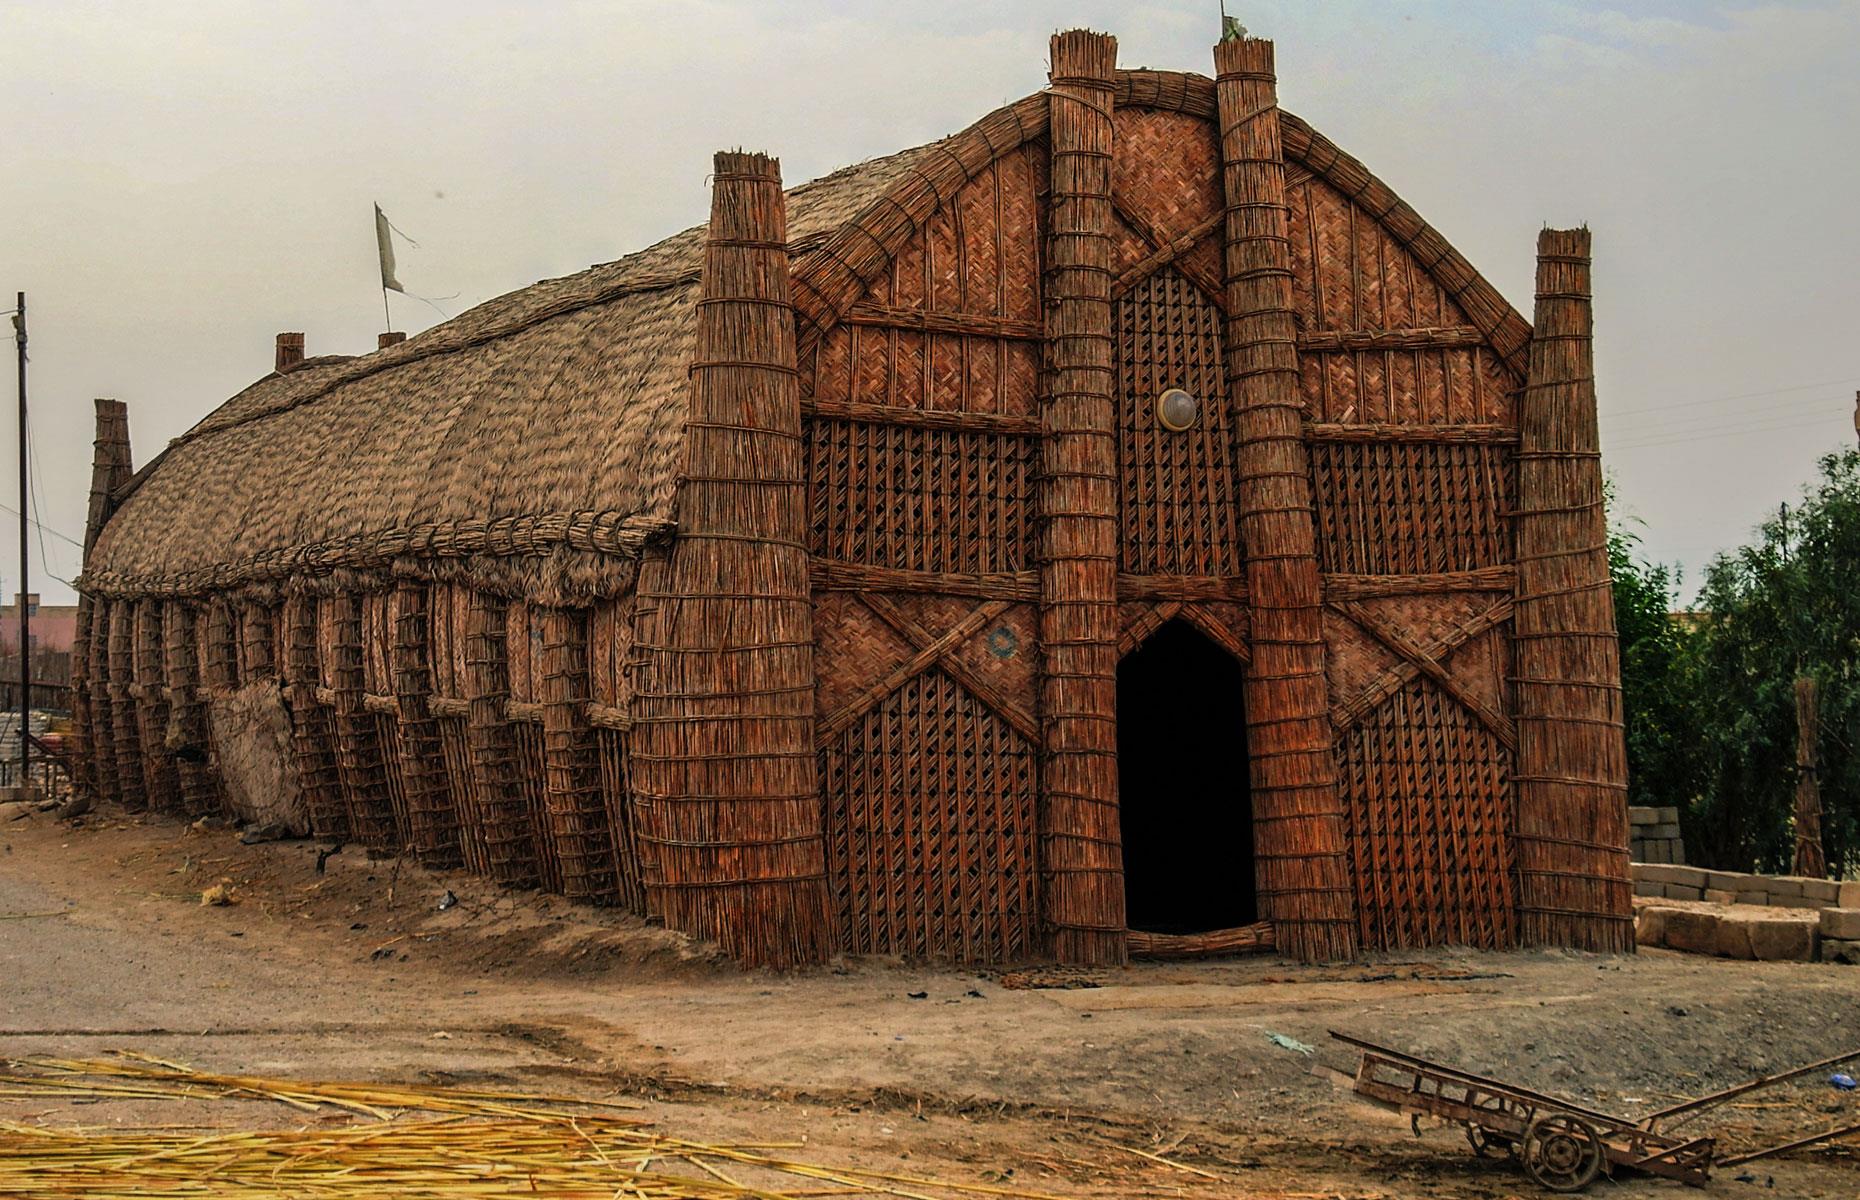 Step Inside The Homes Of These Ancient Civilizations